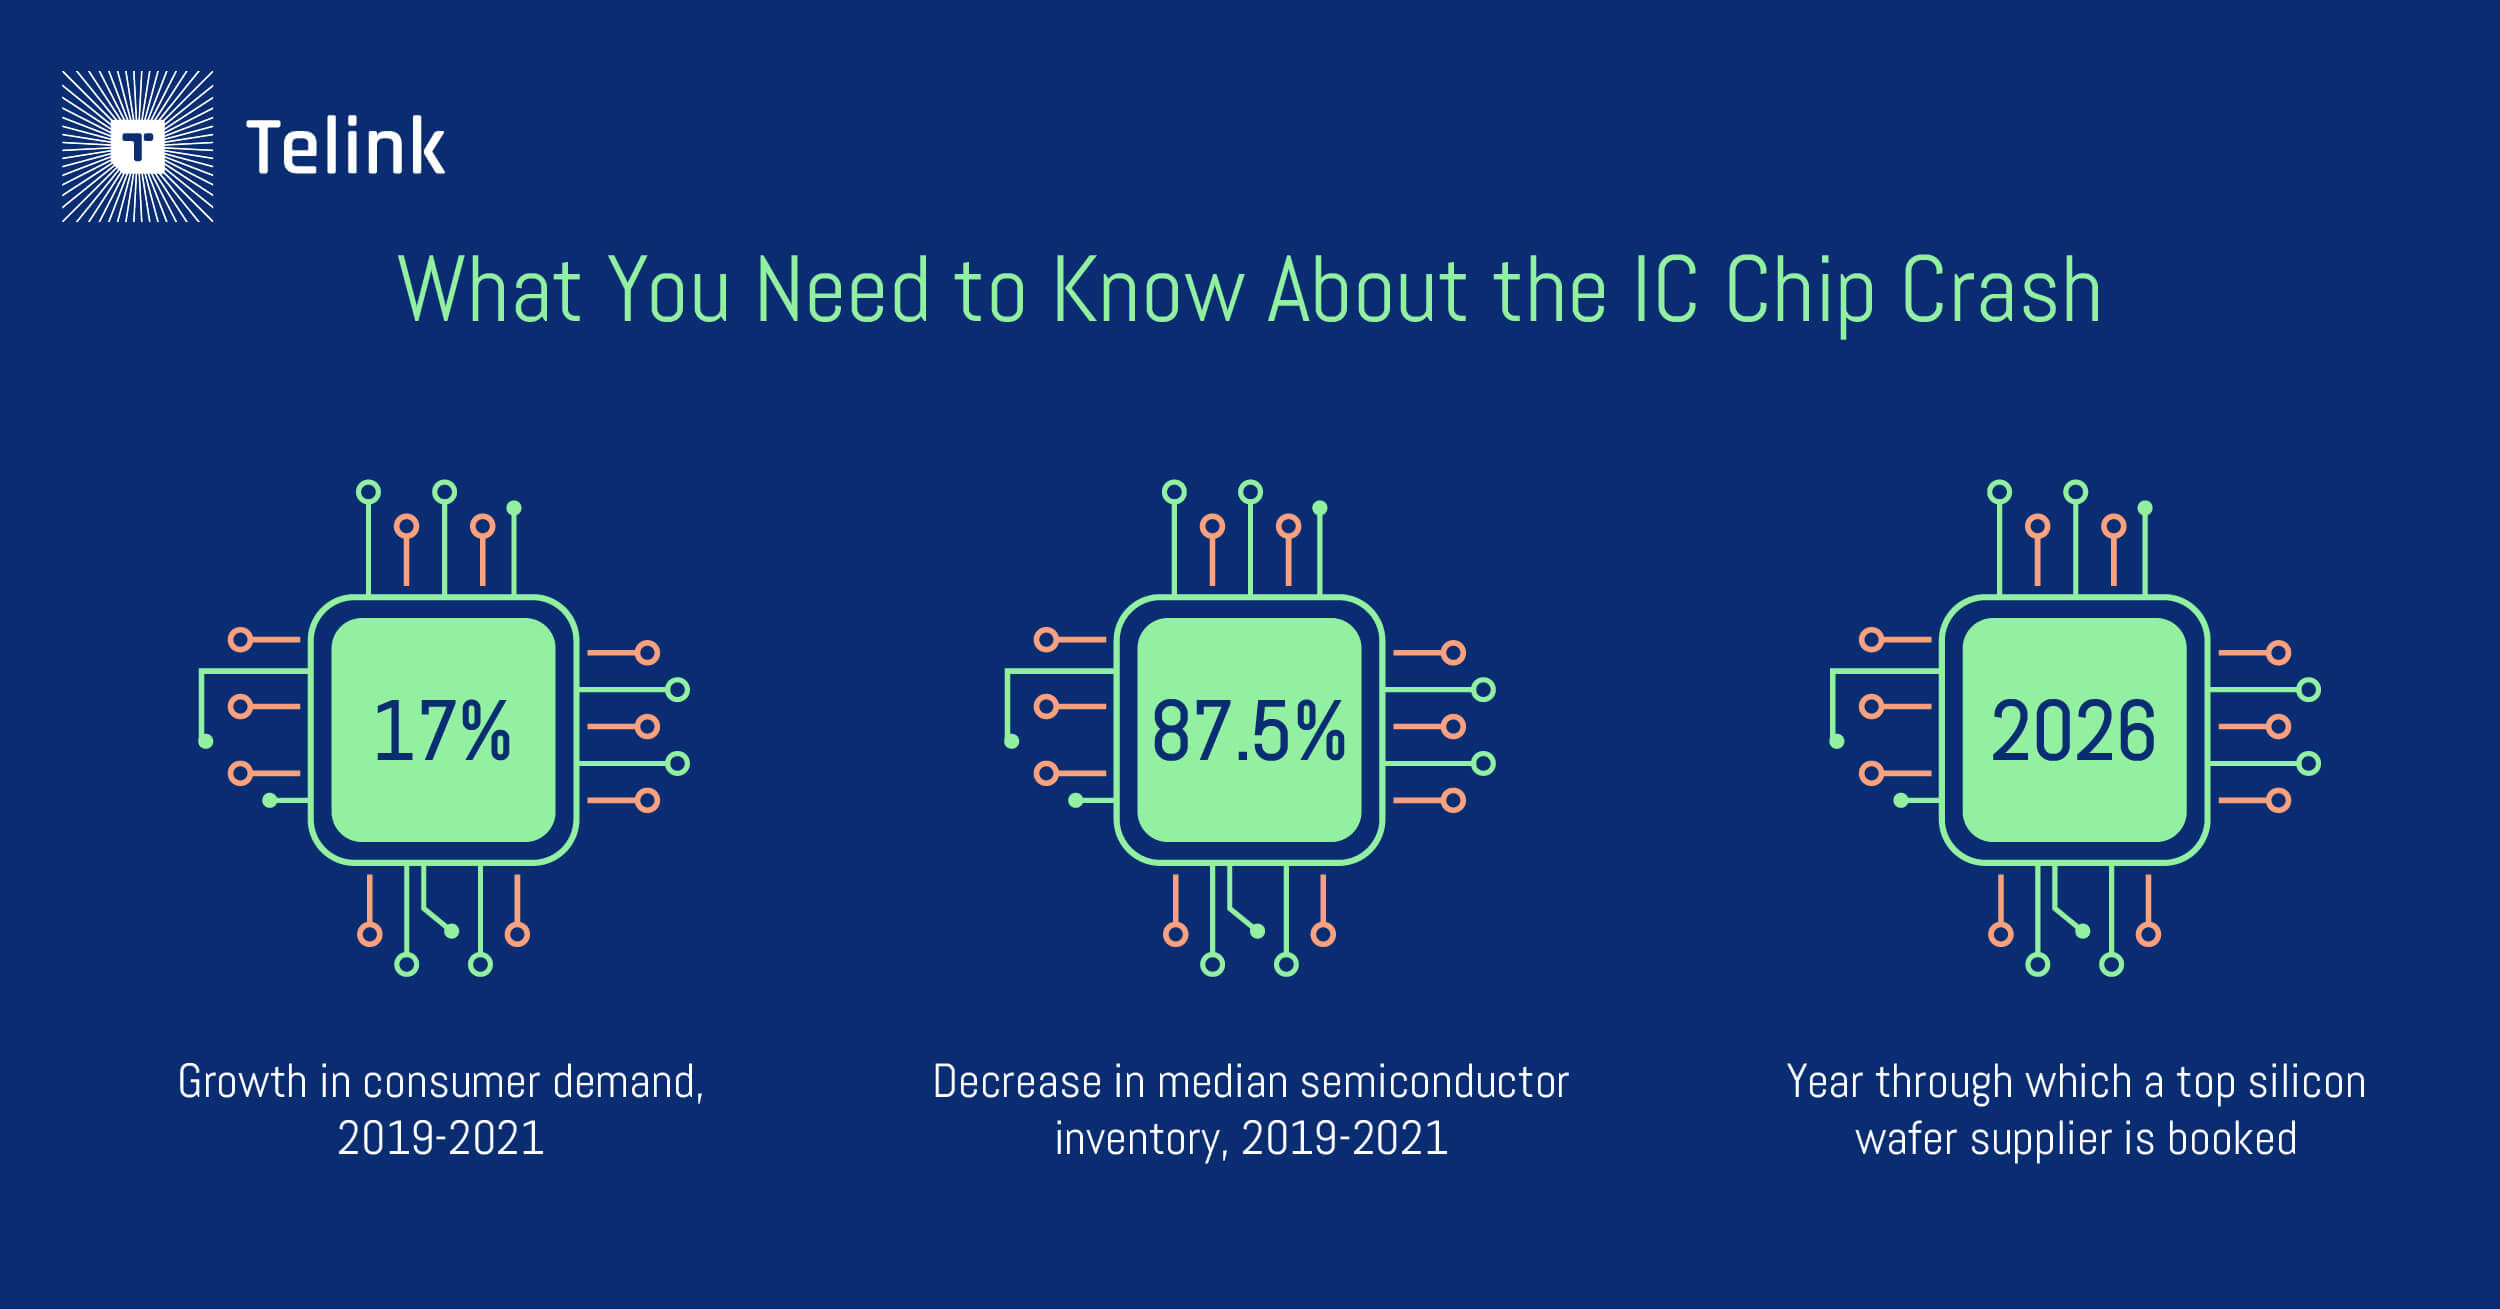 Information about the IC chip crash